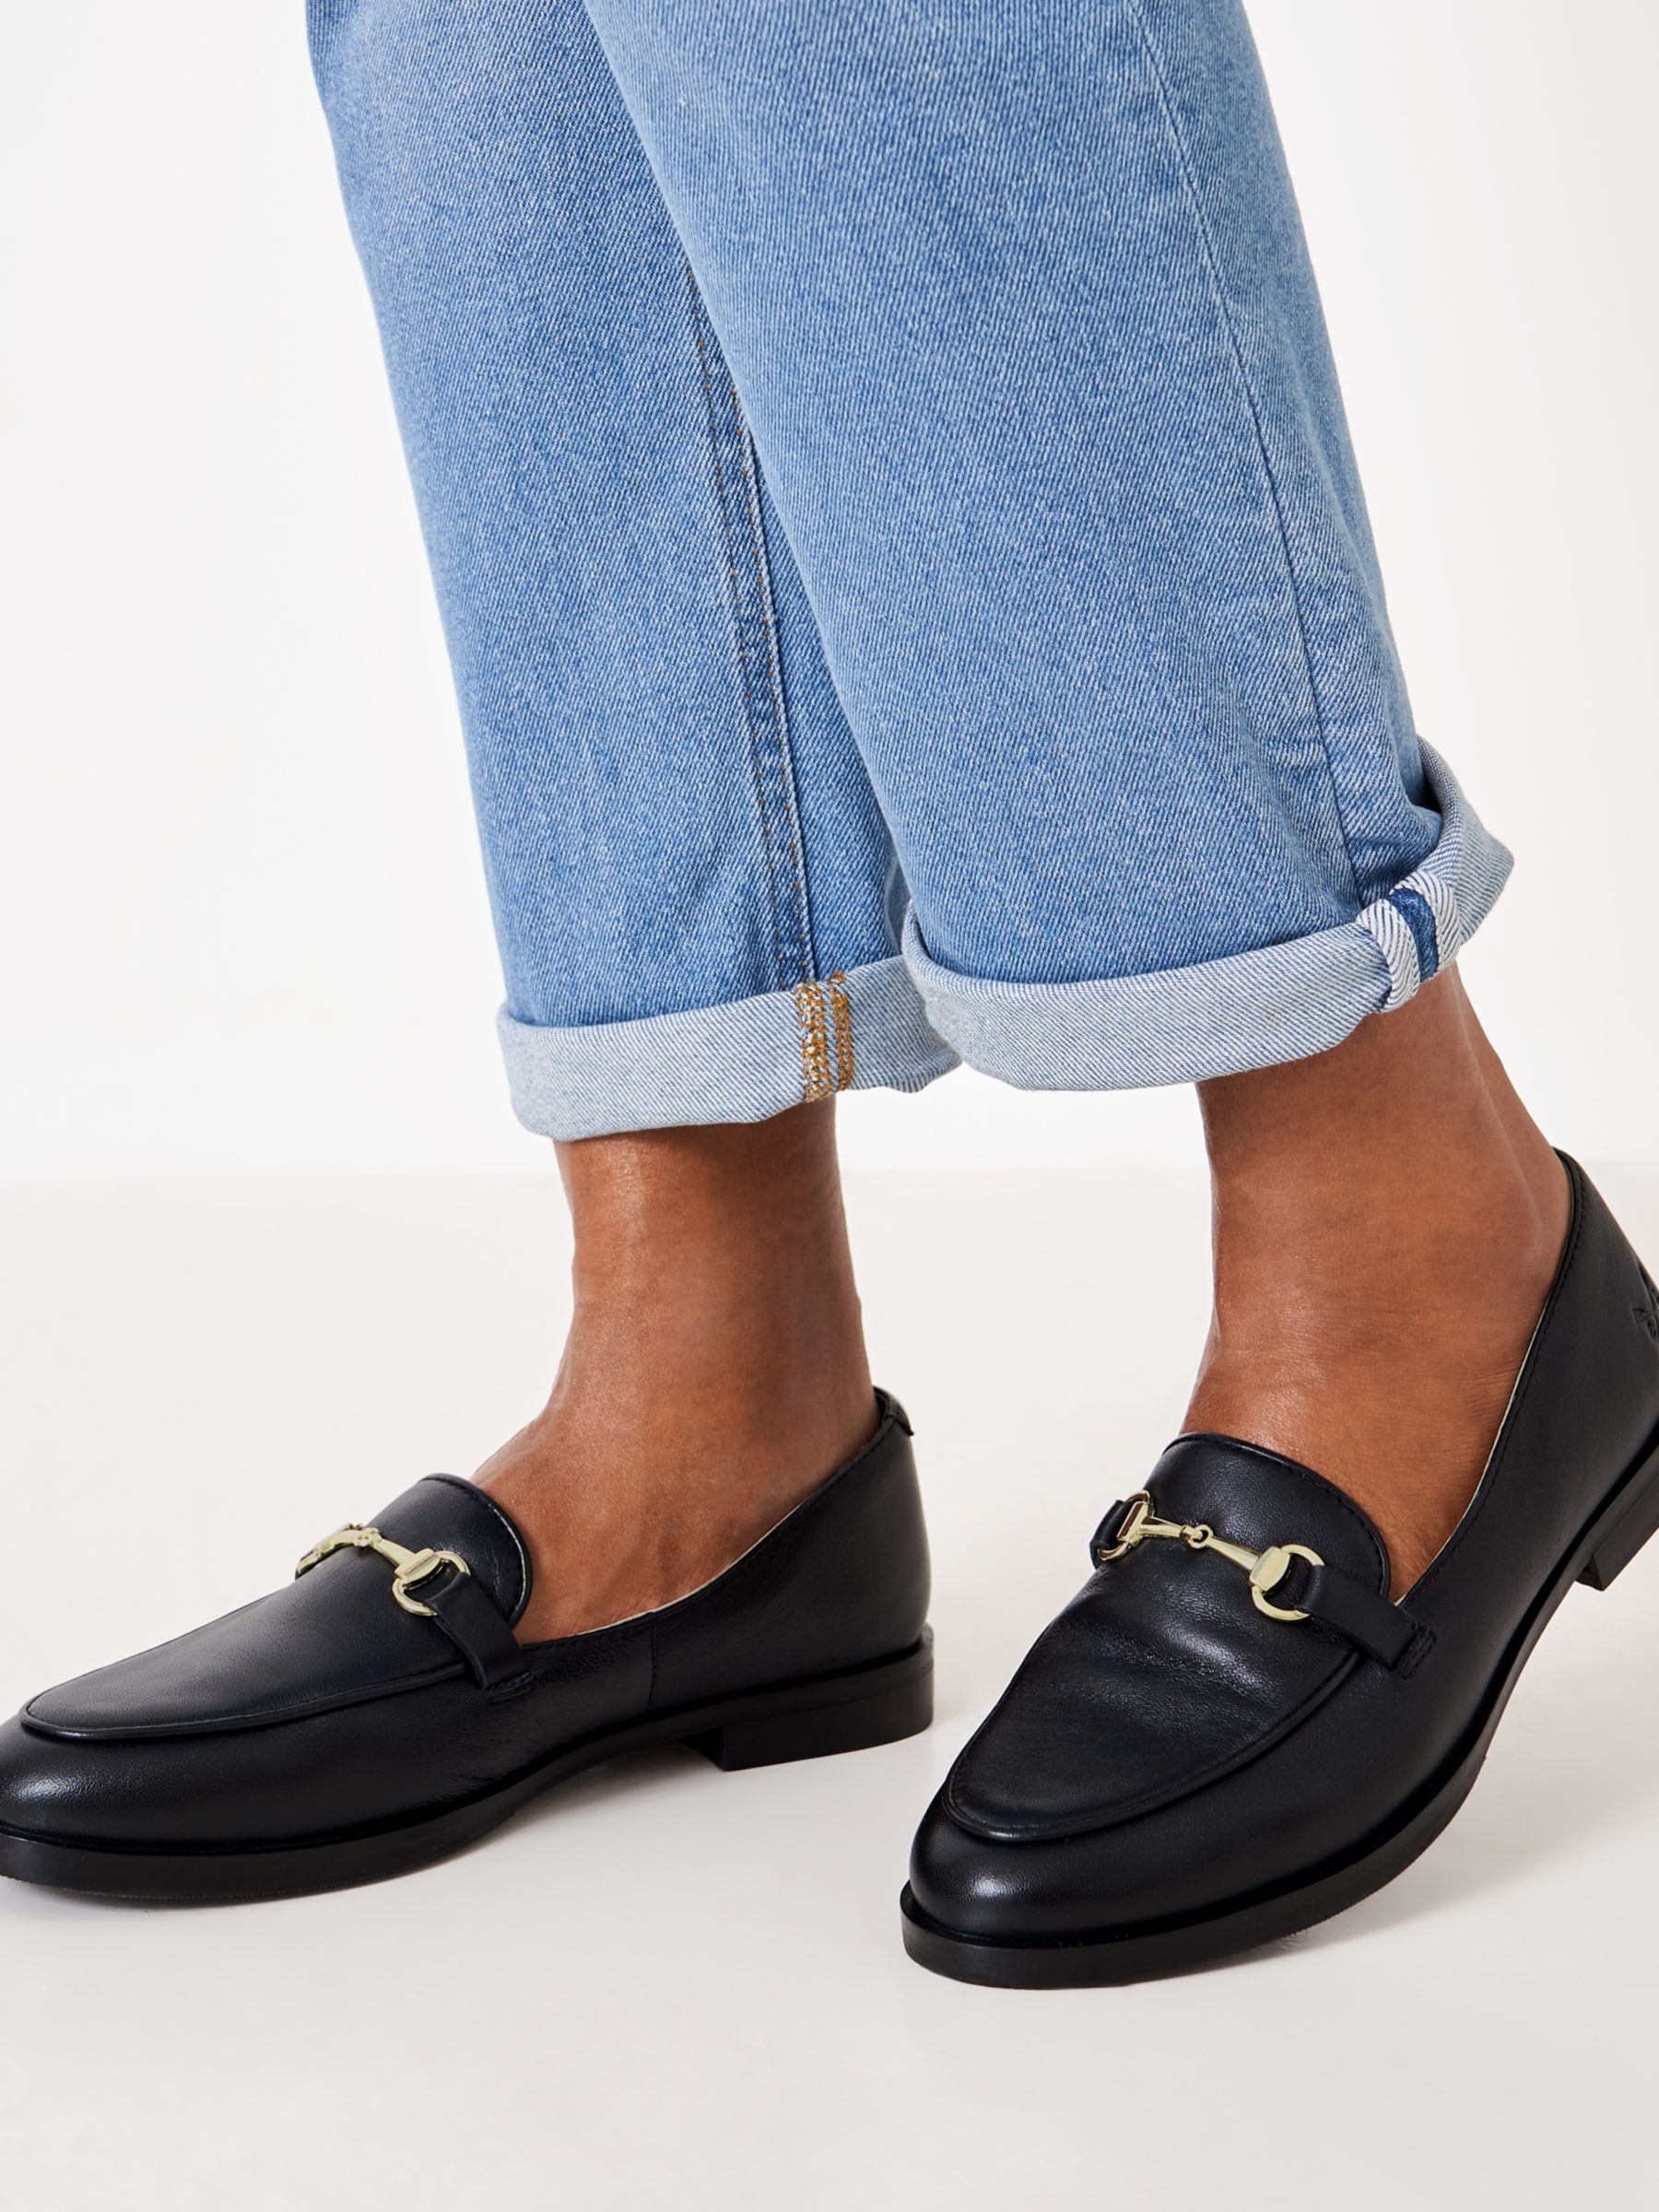 Crew Clothing Cora Leather Loafers, Black at John Lewis & Partners